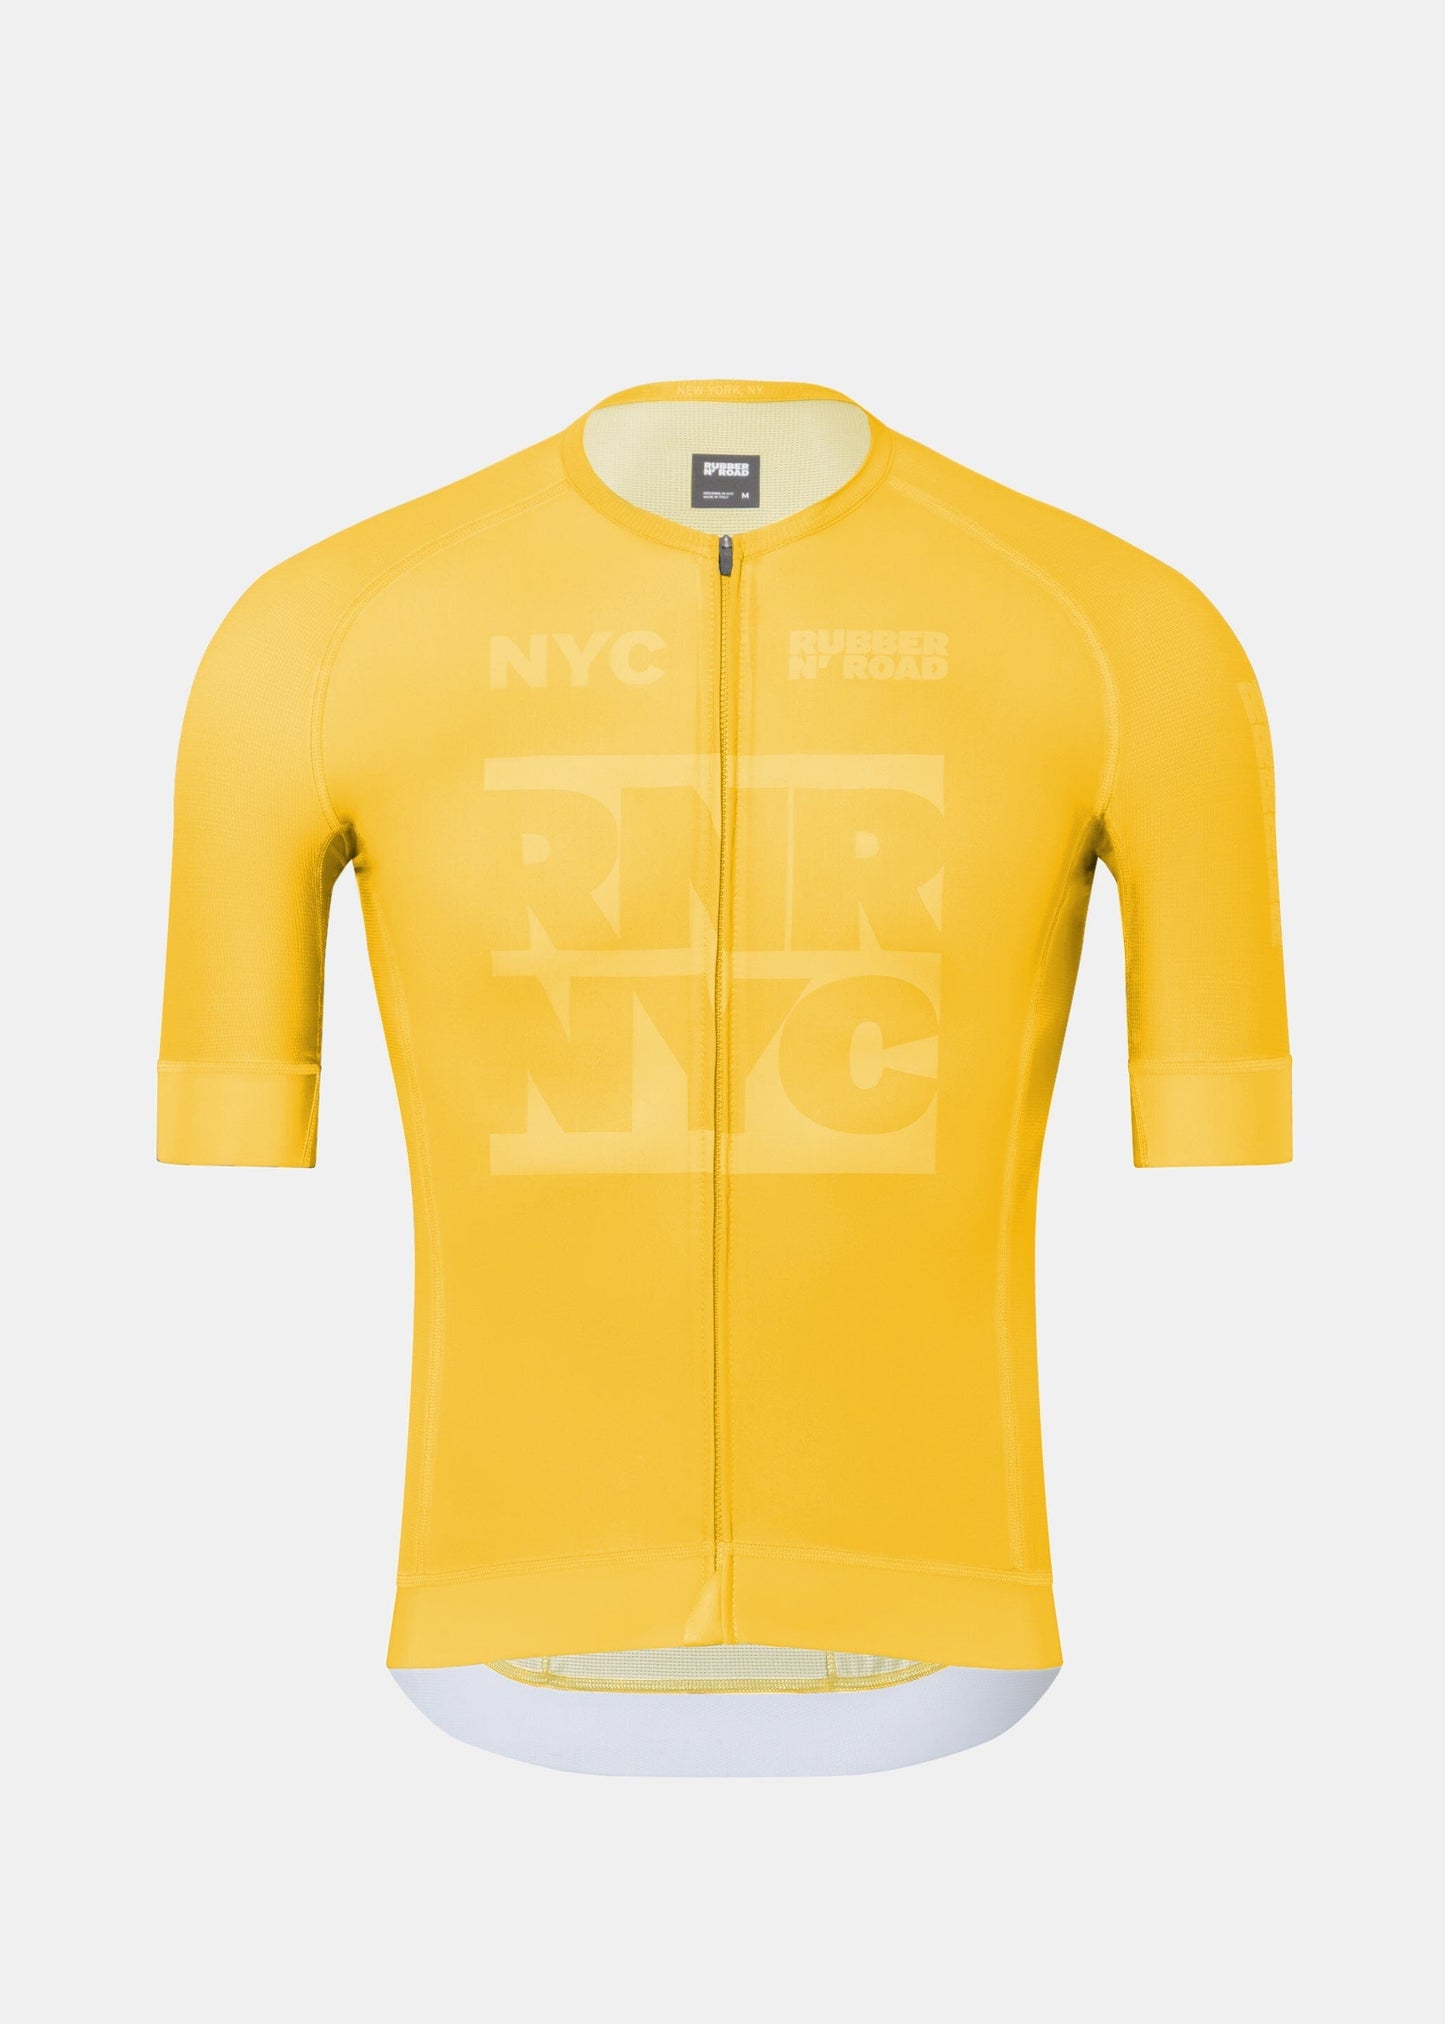 Rubber N' Road - Jersey Shadow Maillots Rubber N' Road Yellow S 